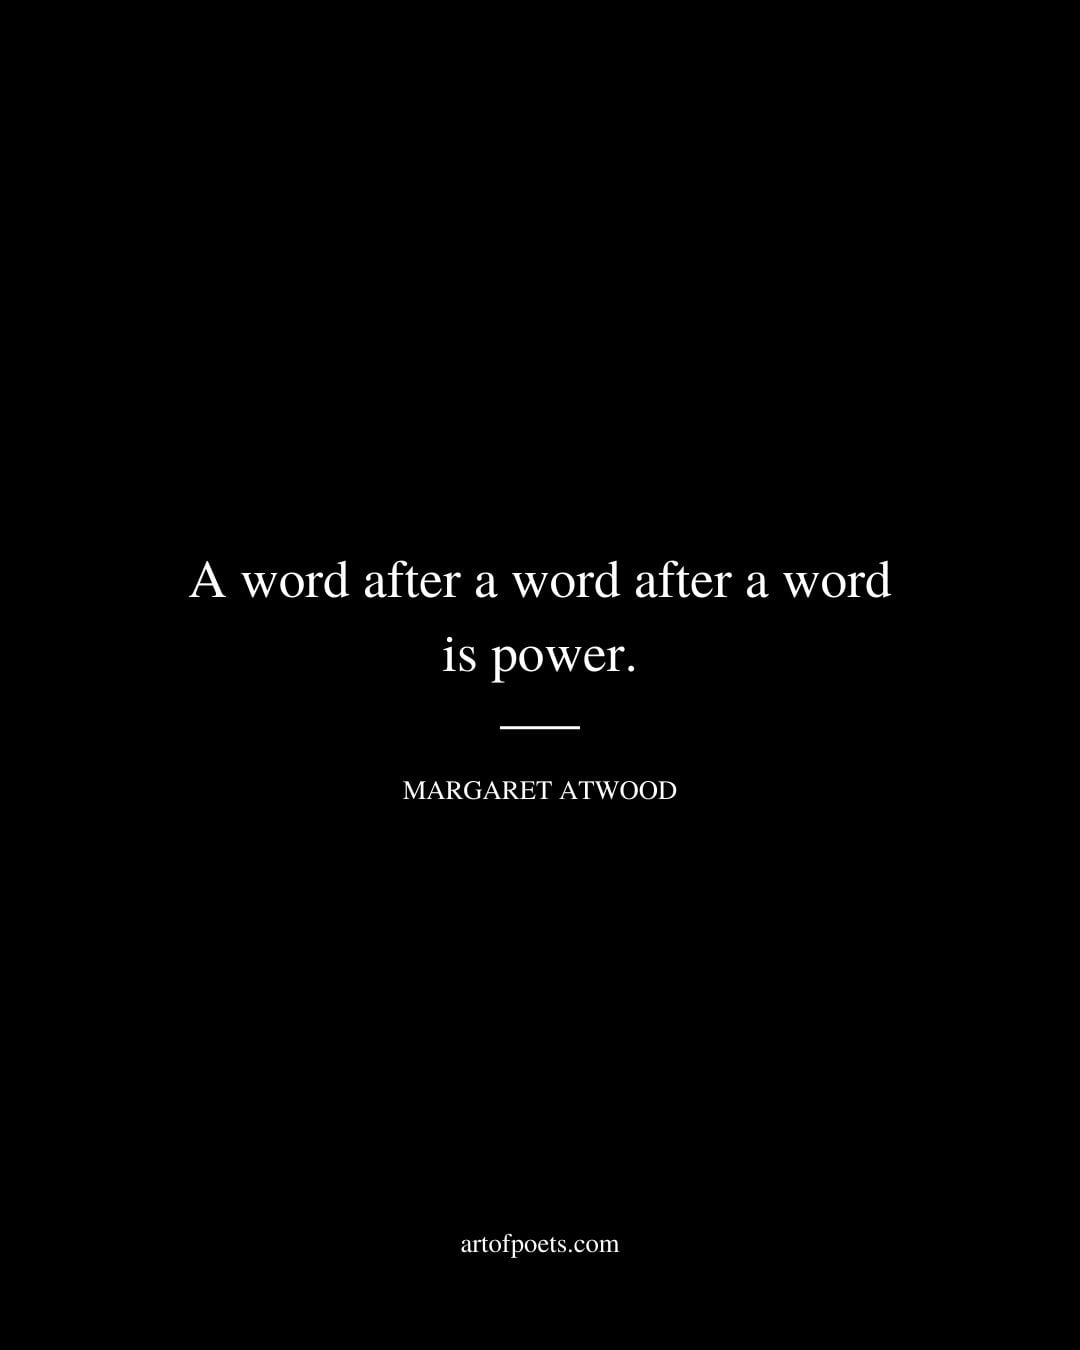 A word after a word after a word is power. Margaret Atwood